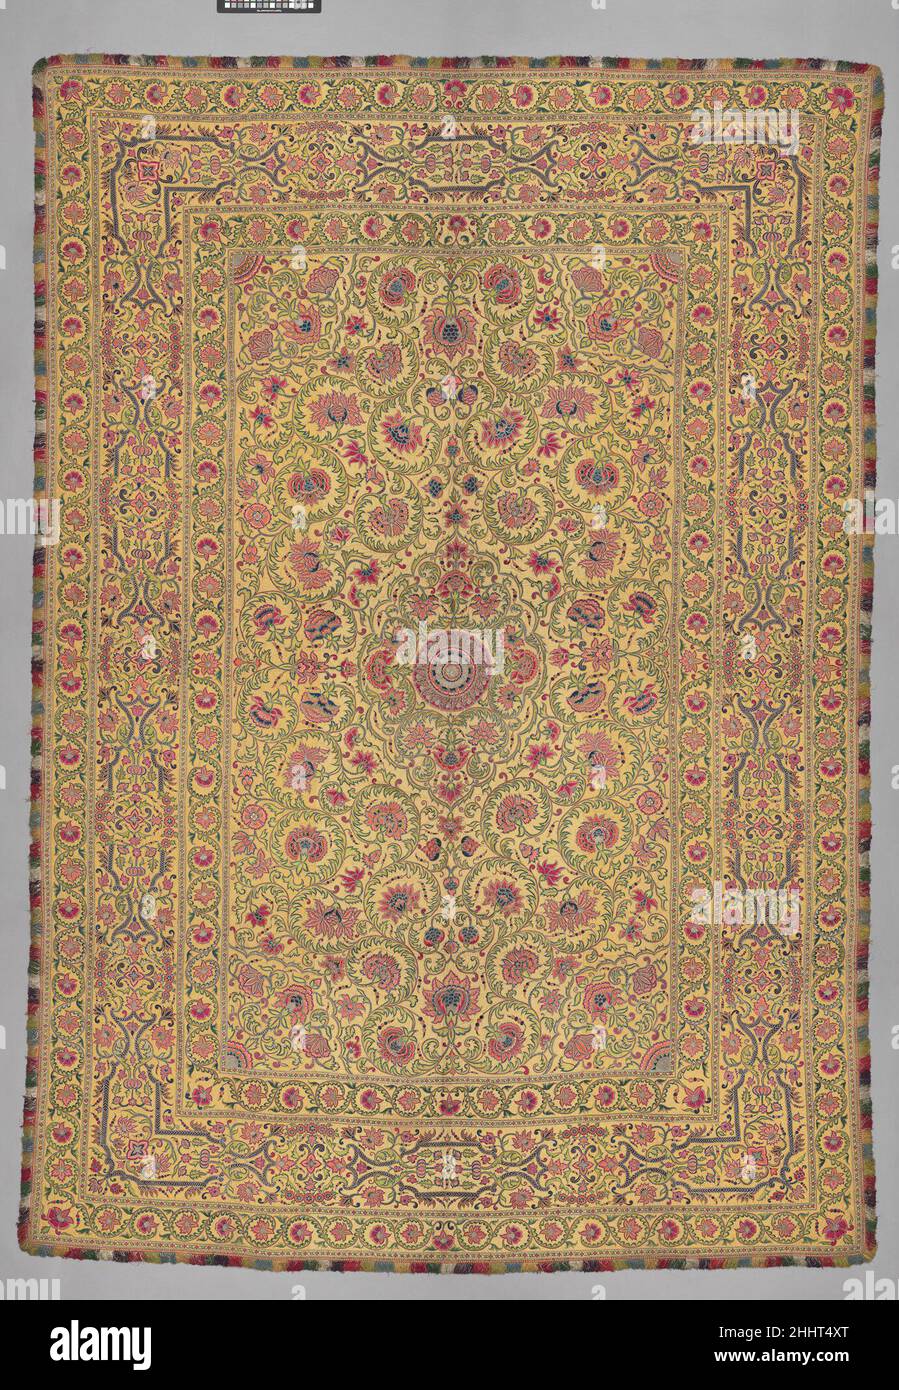 Hanging 16th–17th century Embroidered textiles with central medallions surrounded by flowers and vines were produced in India in the sixteenth through the eighteenth centuries. Because this textile was woven with silver-wrapped thread, it was likely used in a courtly setting, perhaps as a summer carpet or as a cover for the dais (raised platform) of a local ruler. Stylistic and technical similarities to other floor coverings and wall hangings suggest that it may have been produced in the Deccan region during the eighteenth century.Embroidered textiles with central medallions surrounded by flow Stock Photo